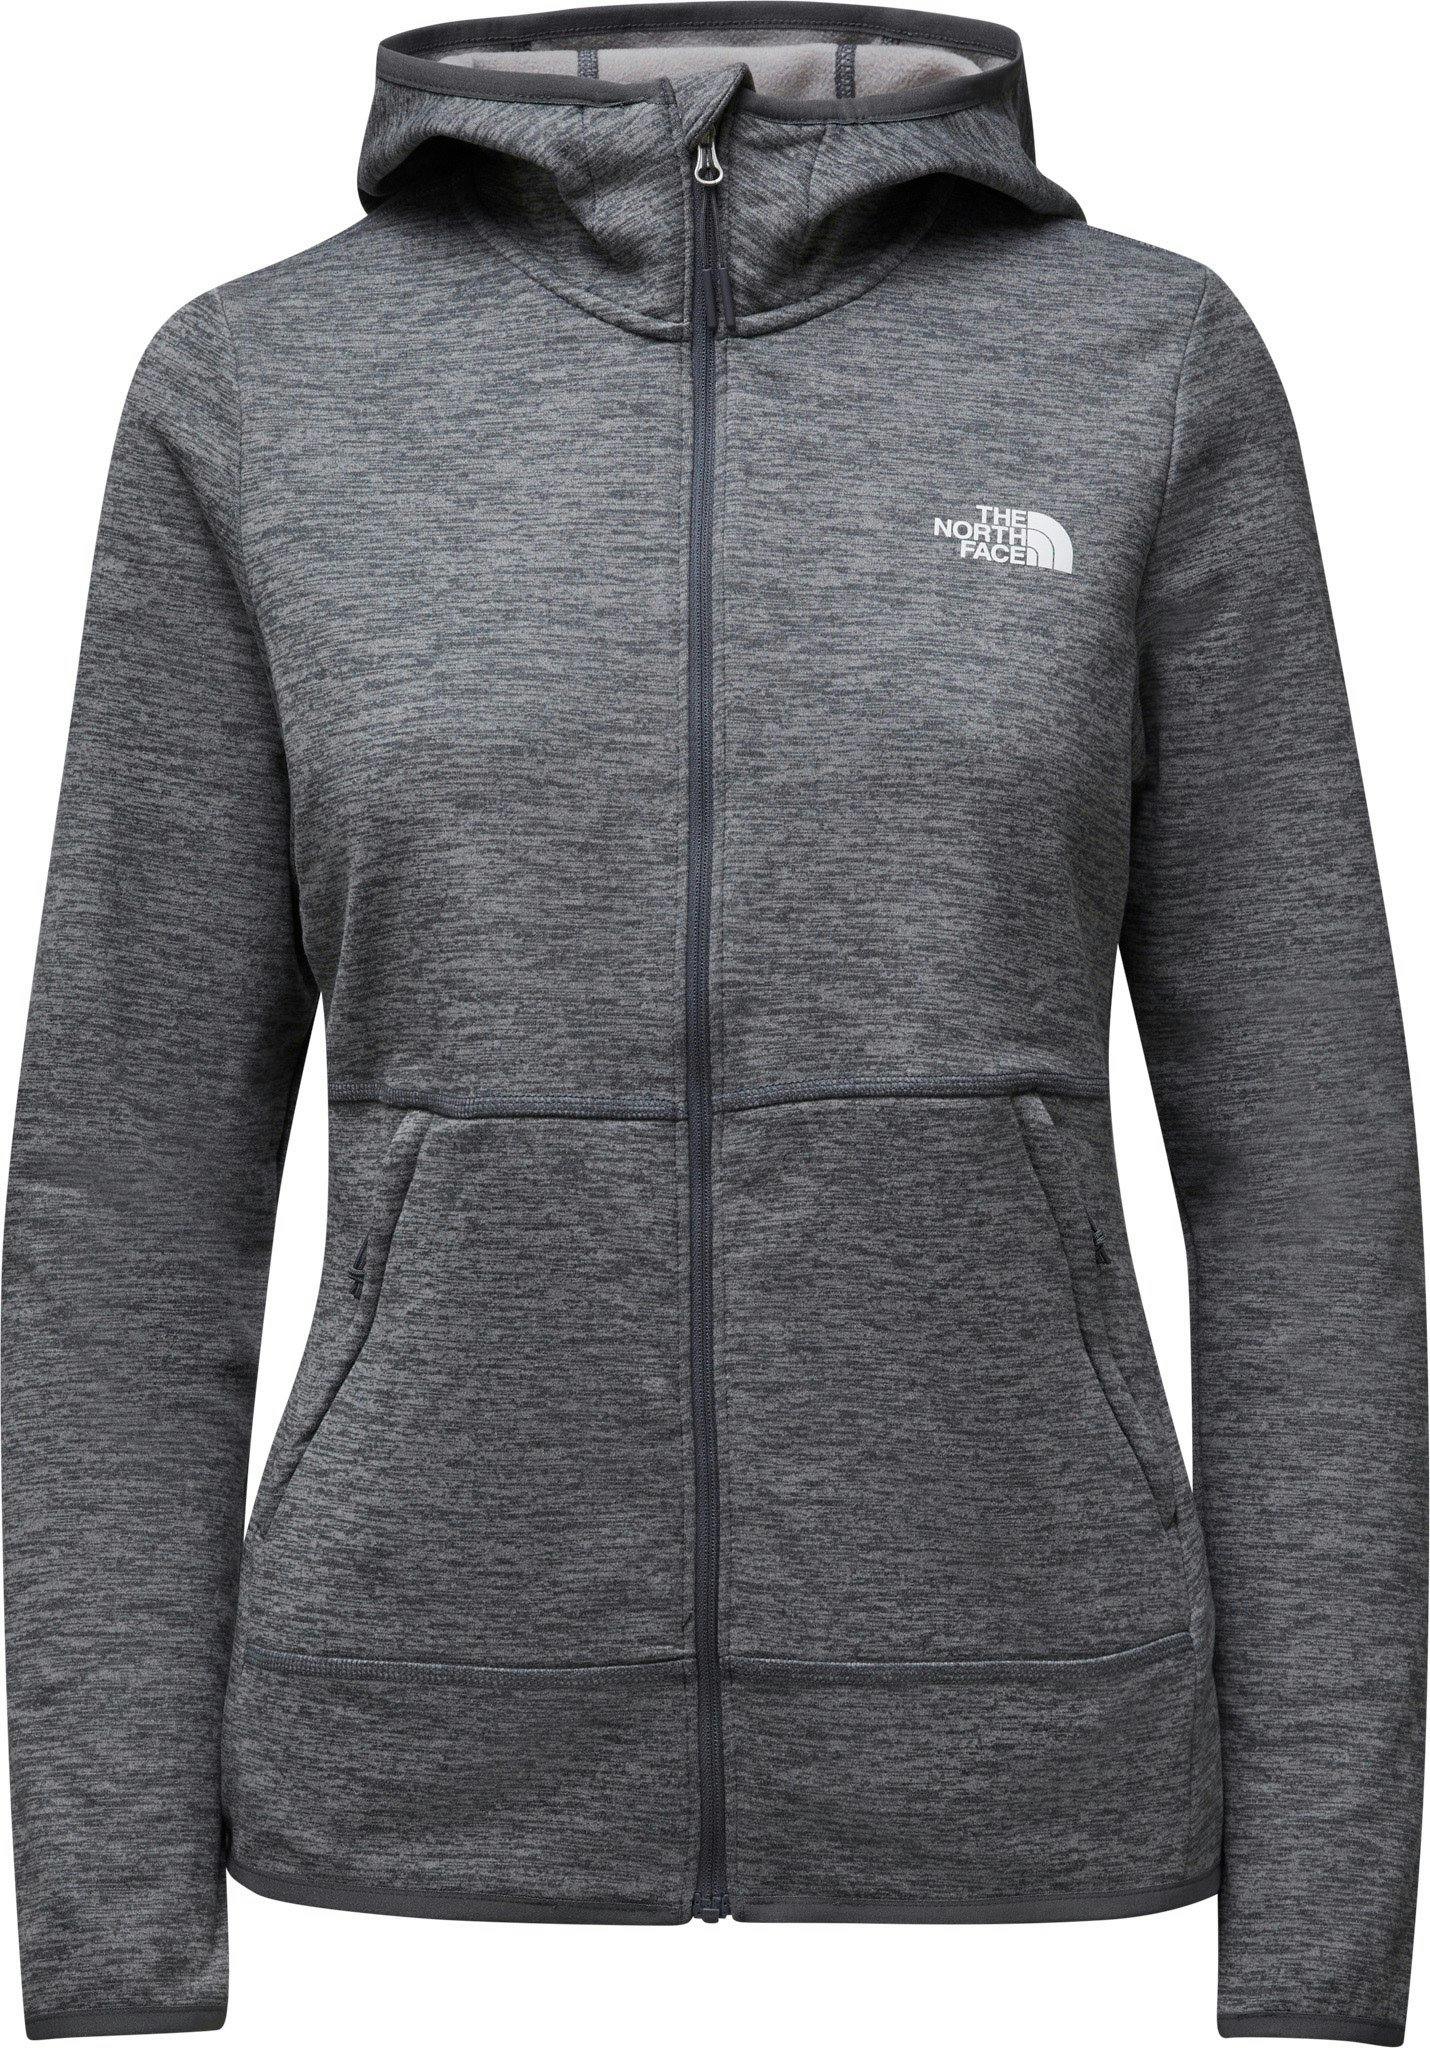 Product image for Canyonlands Hoodie - Women's